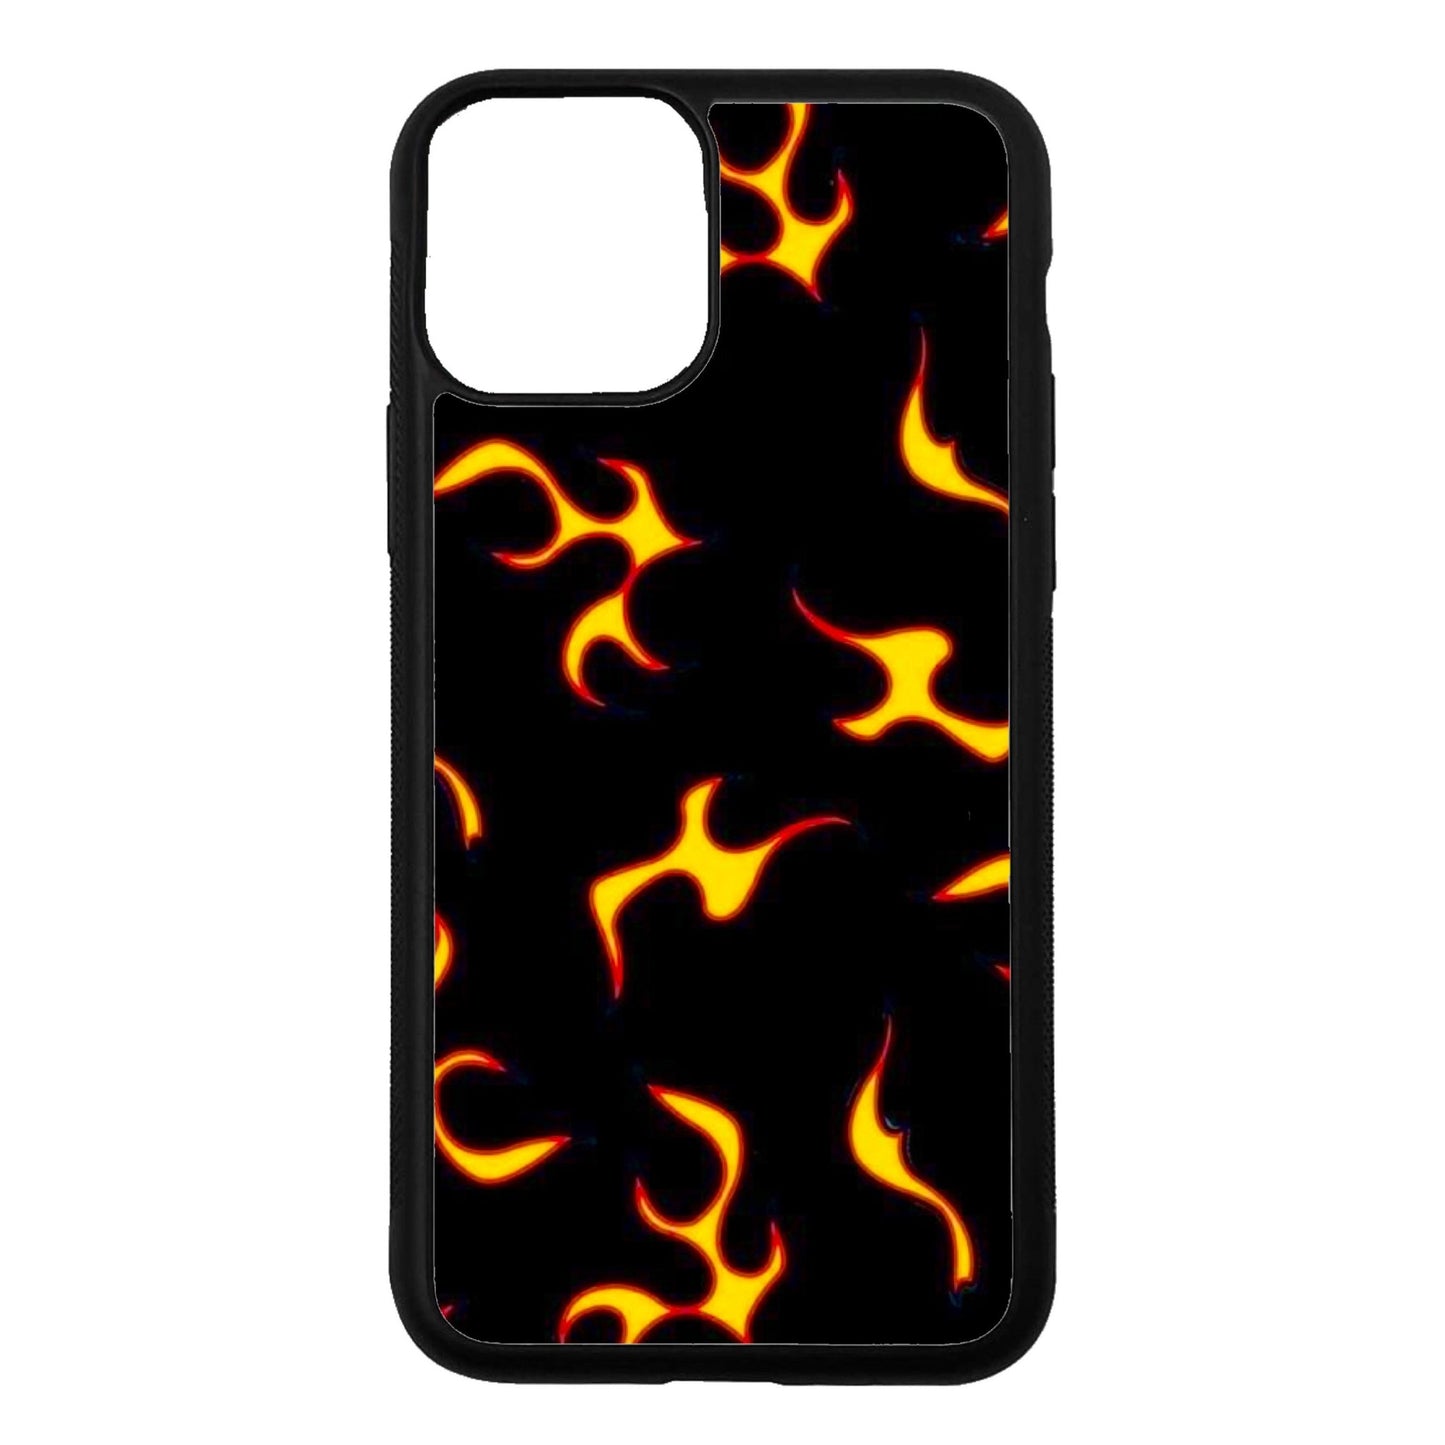 more flame cases - Mai Cases